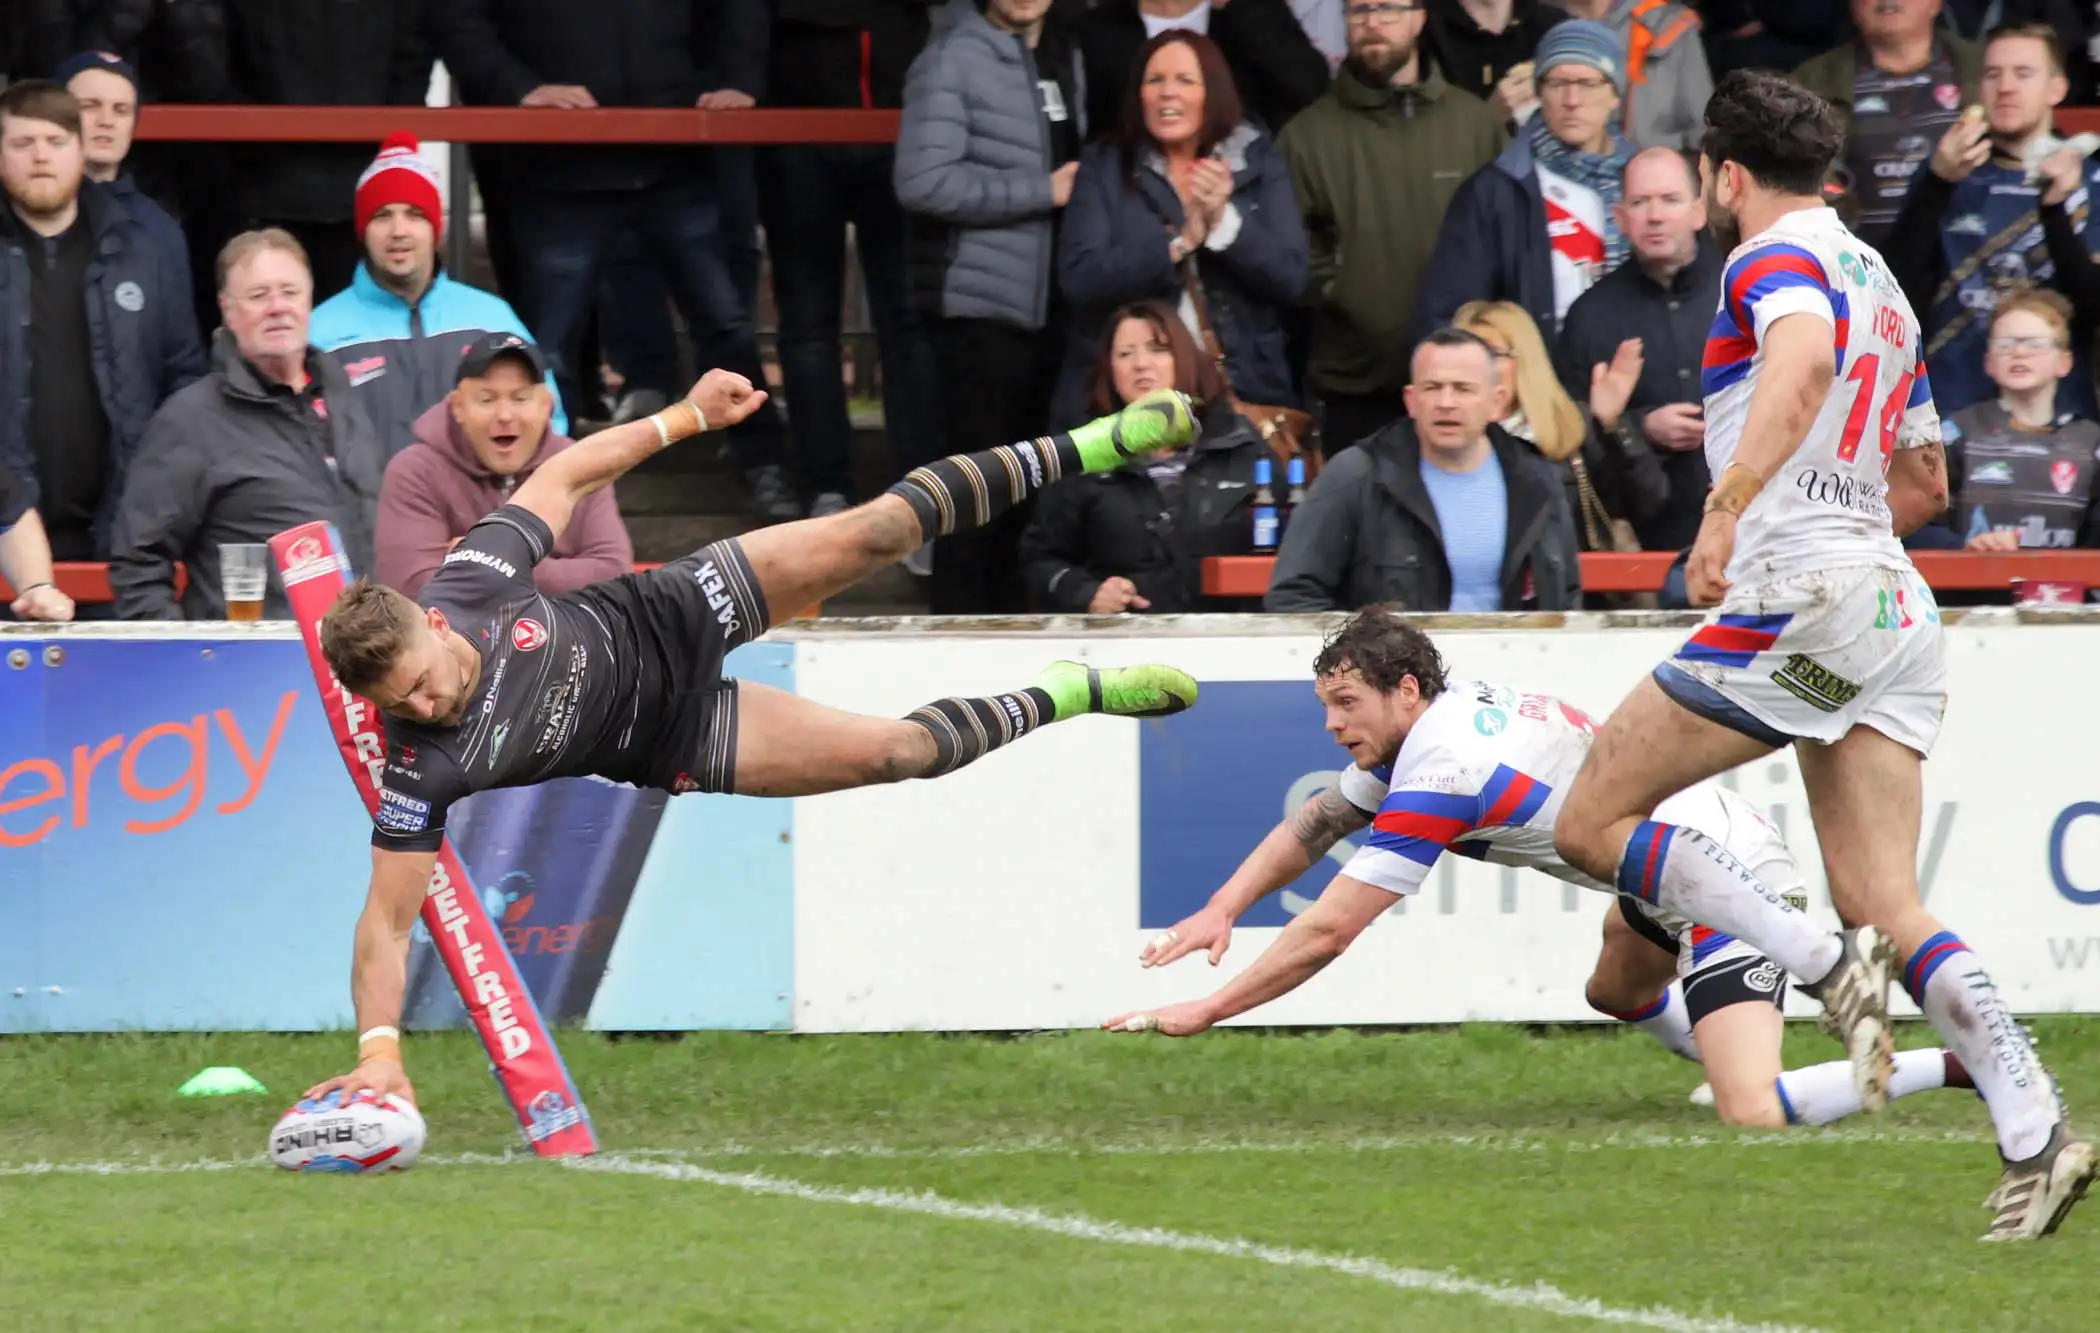 Have your say: Who is the best finisher in Super League?